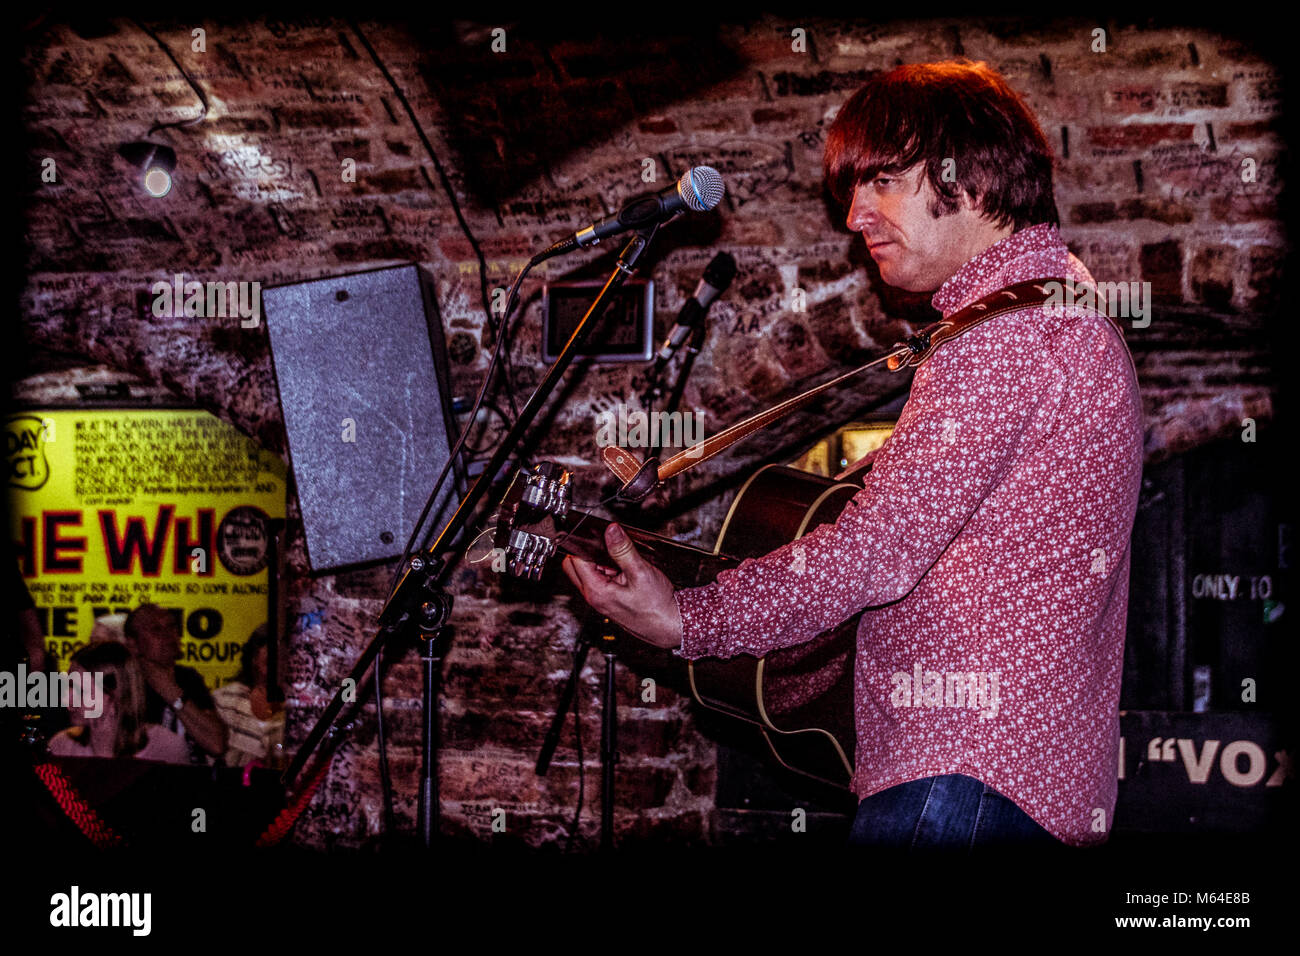 Guitarists performing inside the Cavern Club, Liverpool UK Stock Photo